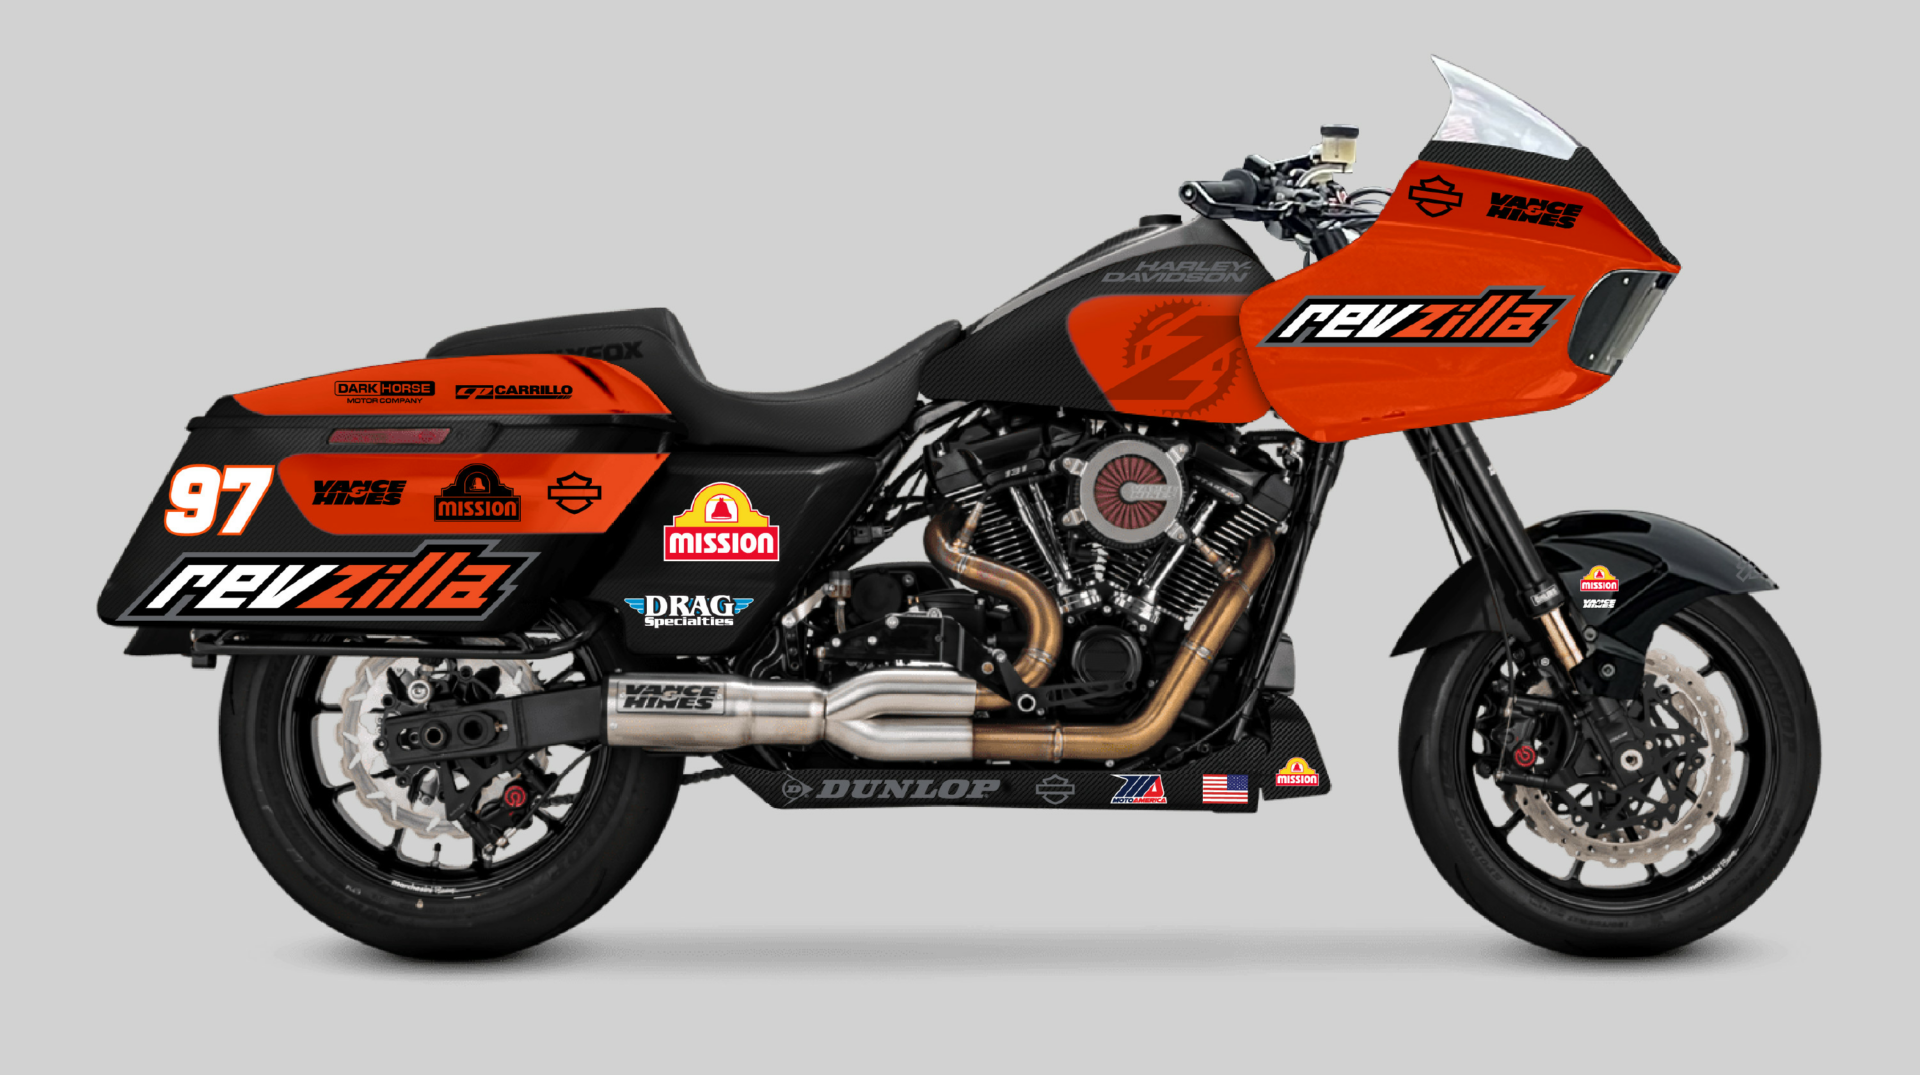 A rendering of Rocco Landers' new Revzilla/Mission/Vance & Hines Harley-Davidson Road Glide racebike. Image courtesy Vance & Hines.